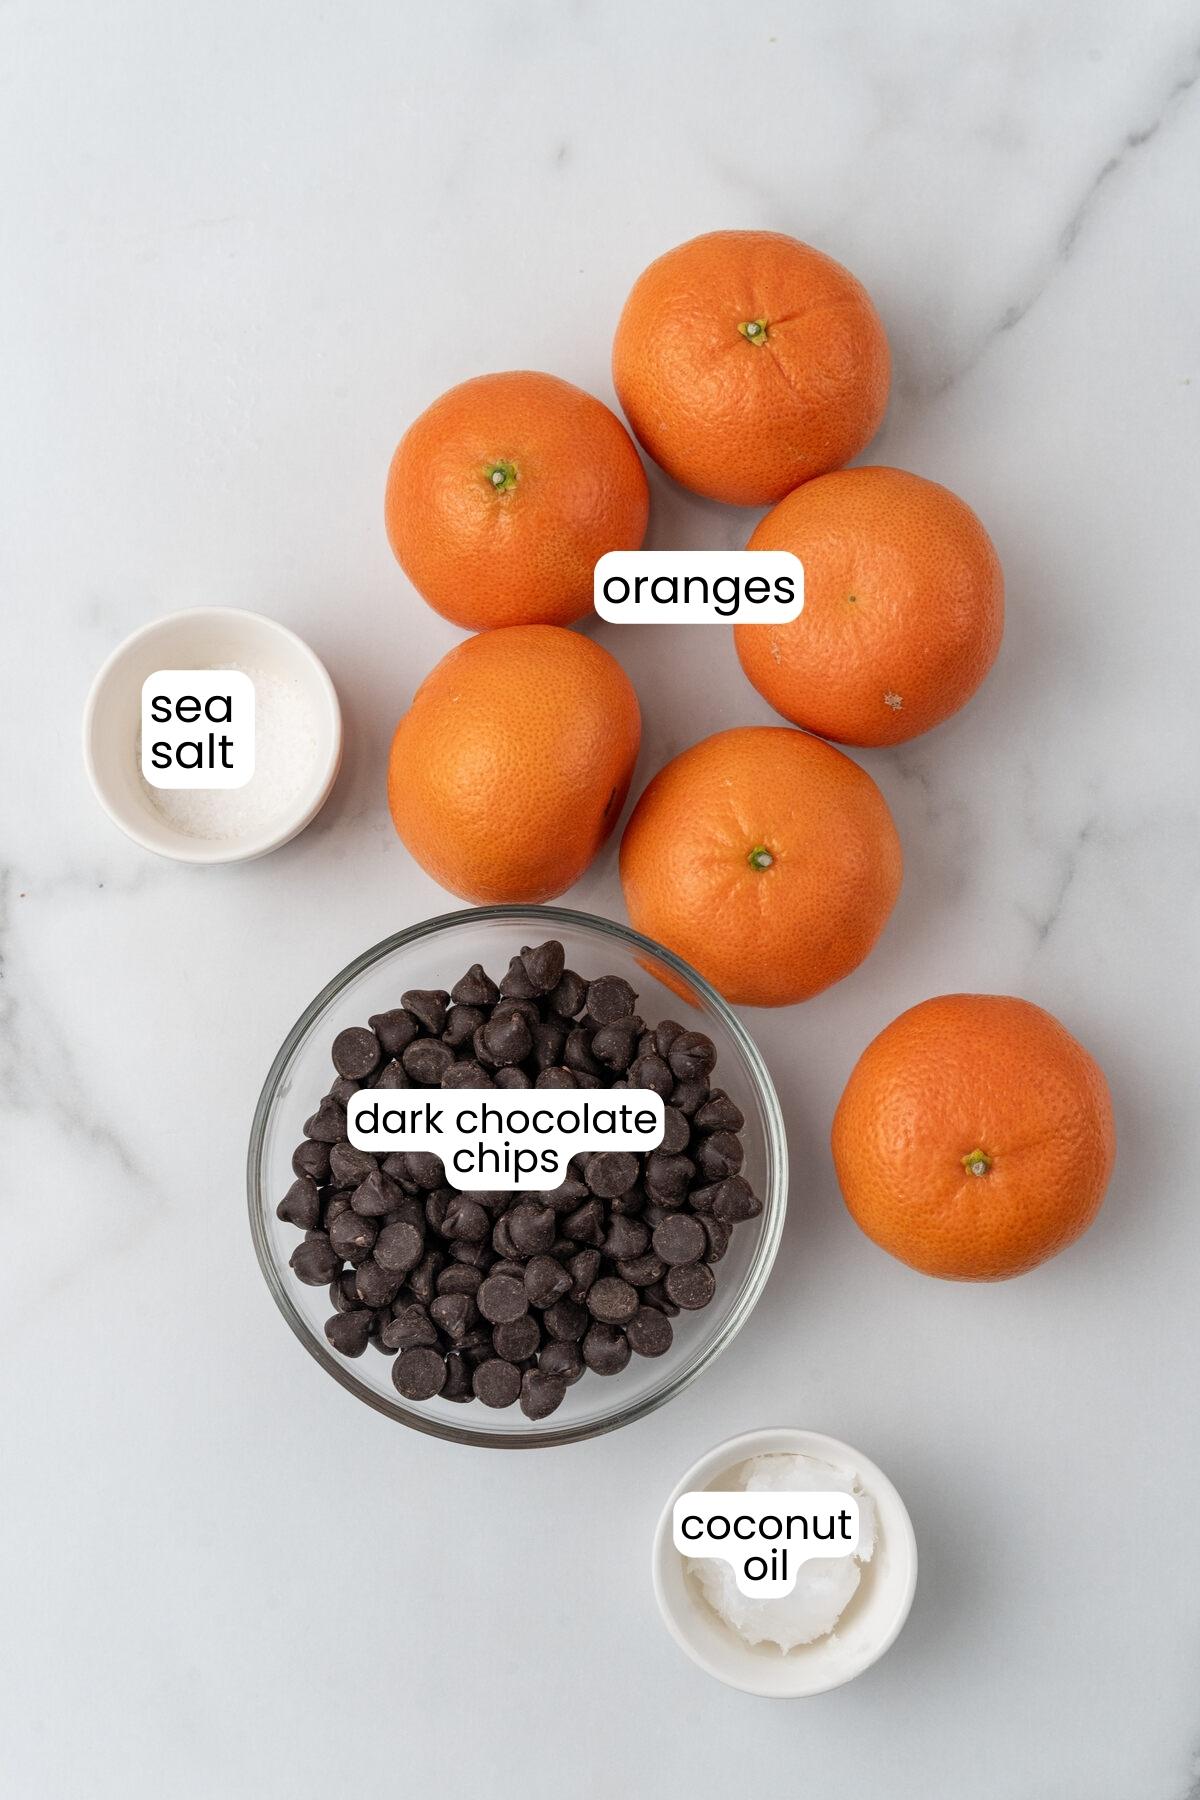 A top-down view of ingredients: chocolate covered oranges, dark chocolate chips, coconut oil, and sea salt on a marble surface, each labeled accordingly.